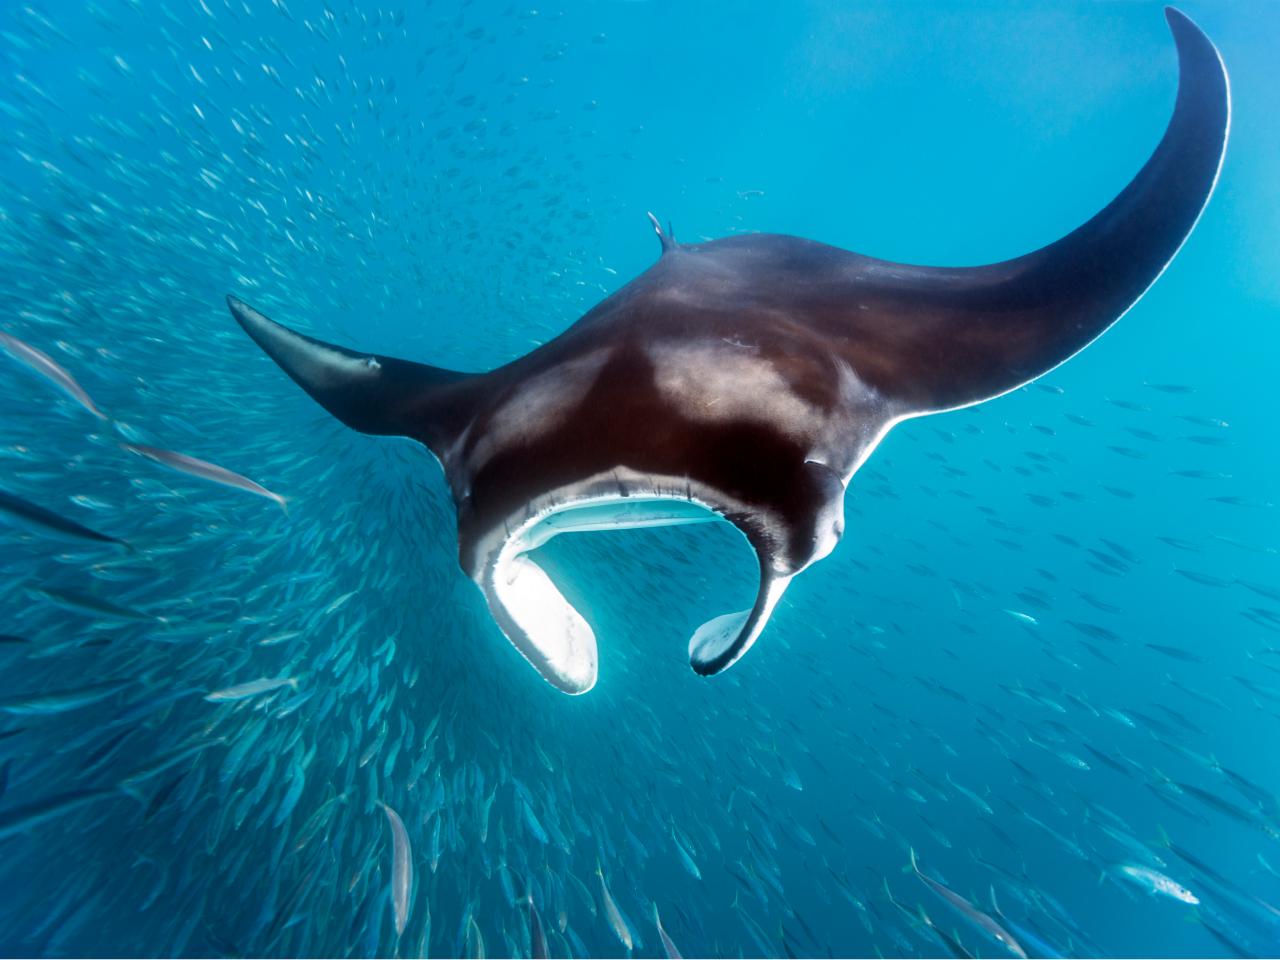 https://discovery.sndimg.com/content/dam/images/discovery/editorial/articles/n/new-study-from-brazil-makes-huge-splash-in-manta-ray-conservation/GettyImages-535651293.jpg.rend.hgtvcom.1280.960.suffix/1624484204478.jpeg